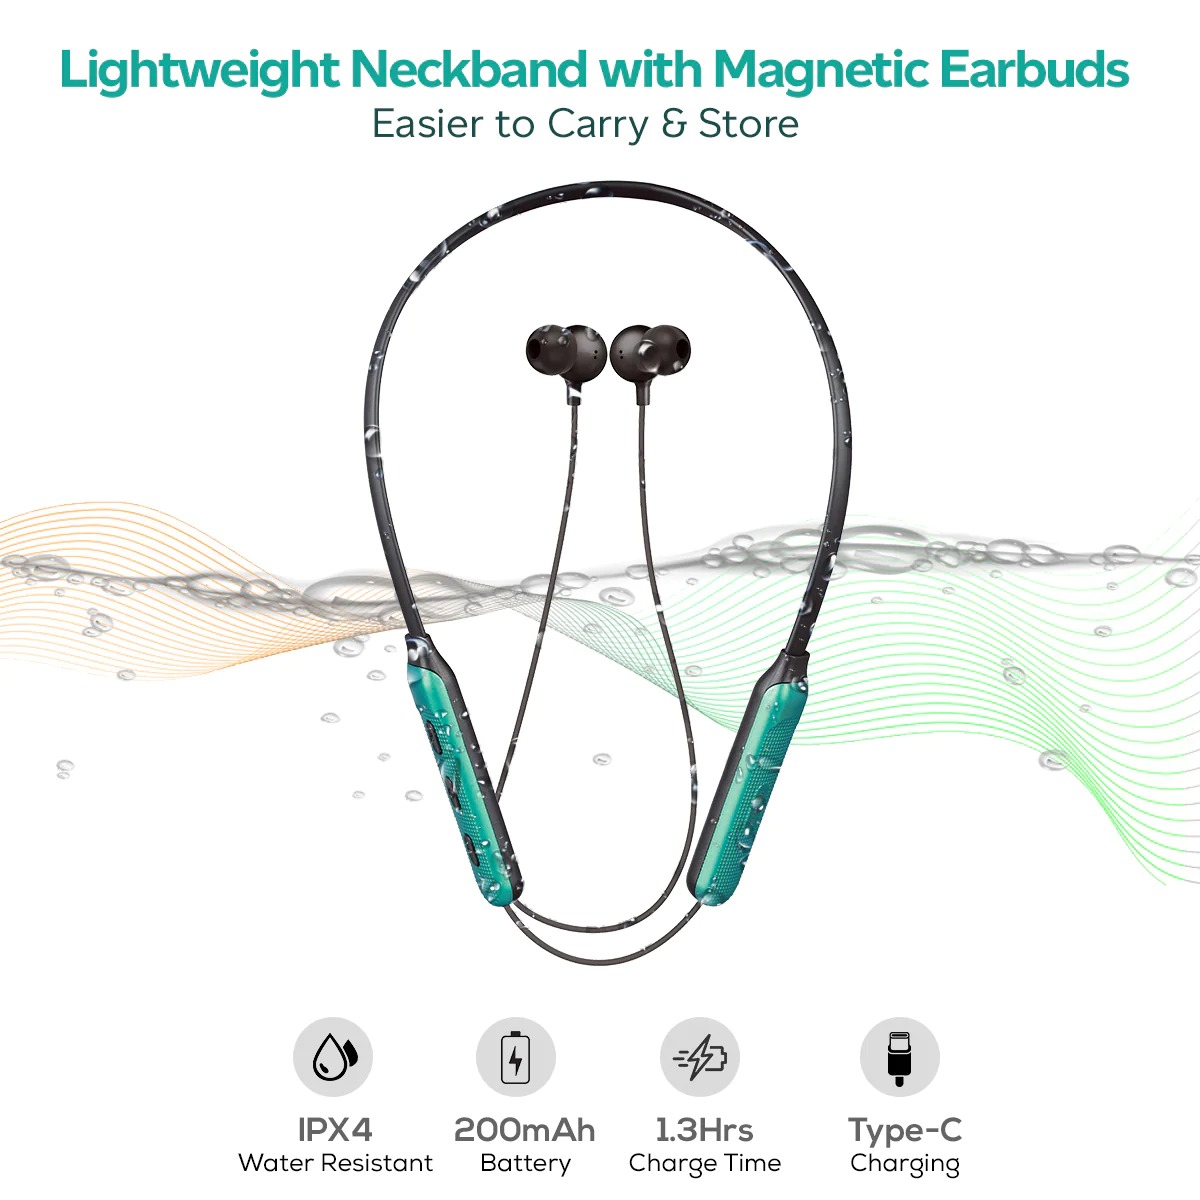 pTron Tangent Duo Bluetooth 5.2 Wireless in-Ear Earphones with Mic, 24Hrs Playback, 13mm Drivers, Punchy Bass, Type-C Port, Magnetic Earbuds, Voice Assistant, IPX4 & Integrated Controls (Black/Green)